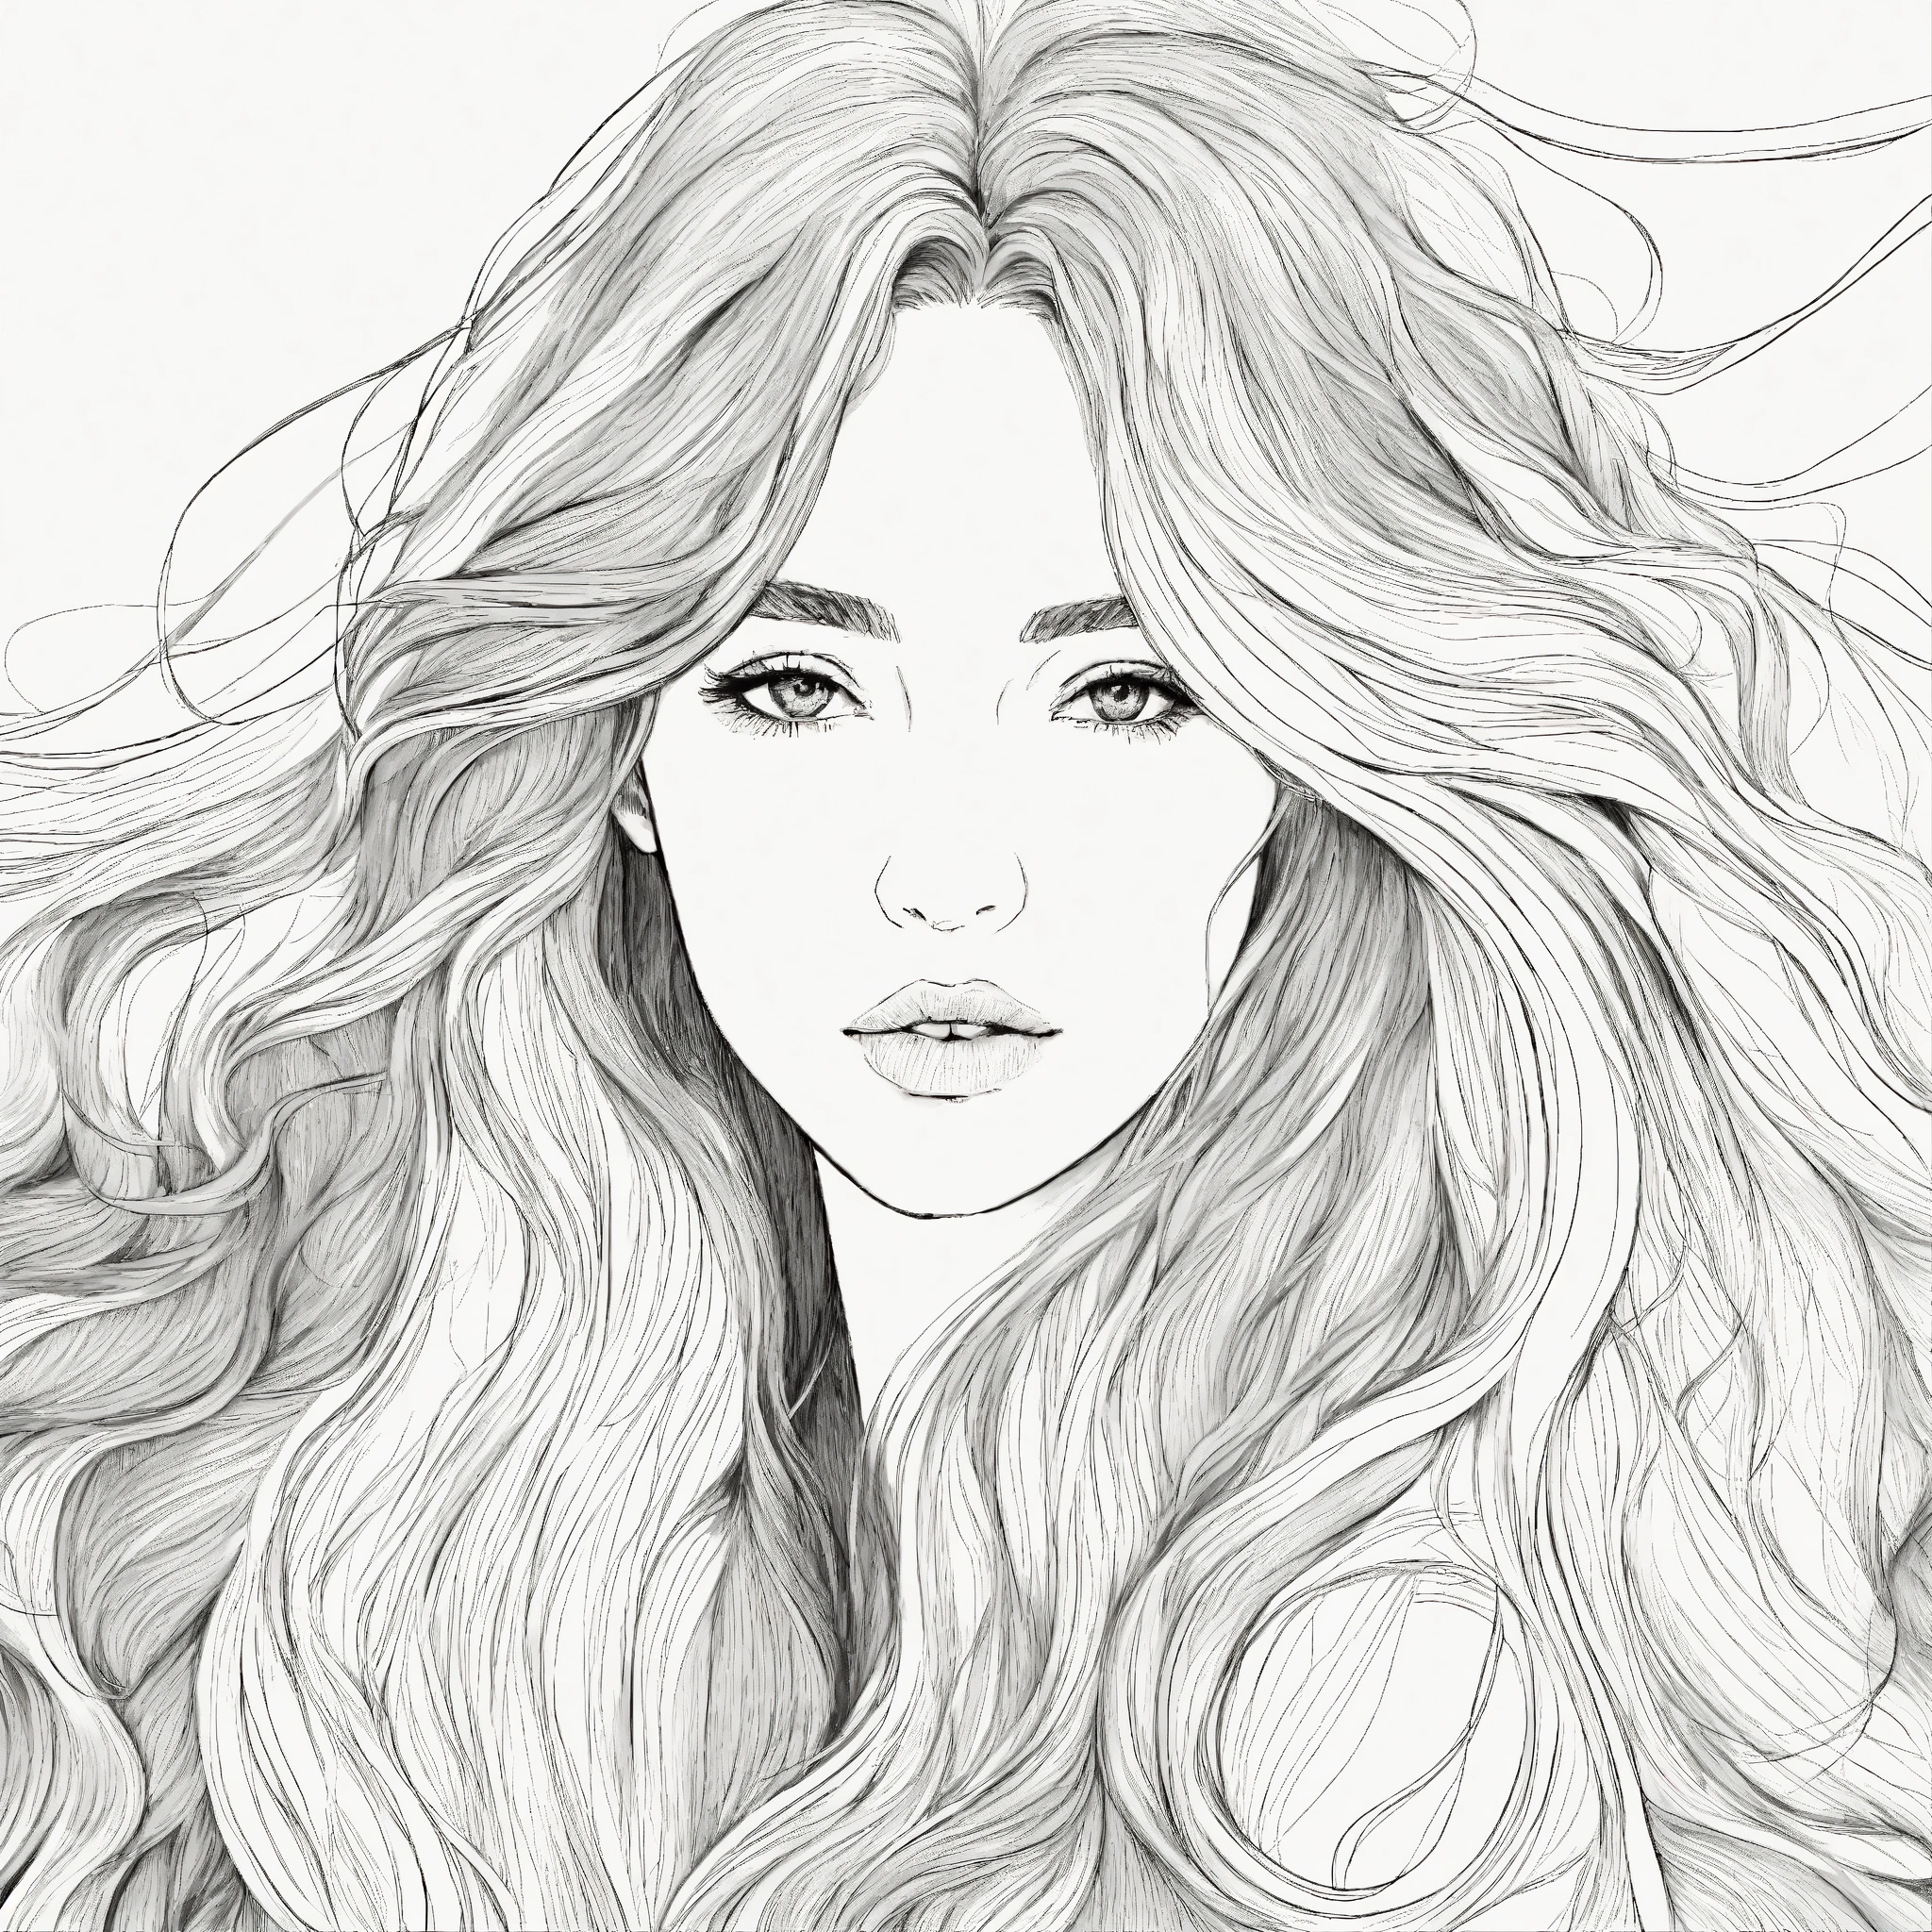 Lexica Female line drawing with long flowy hair